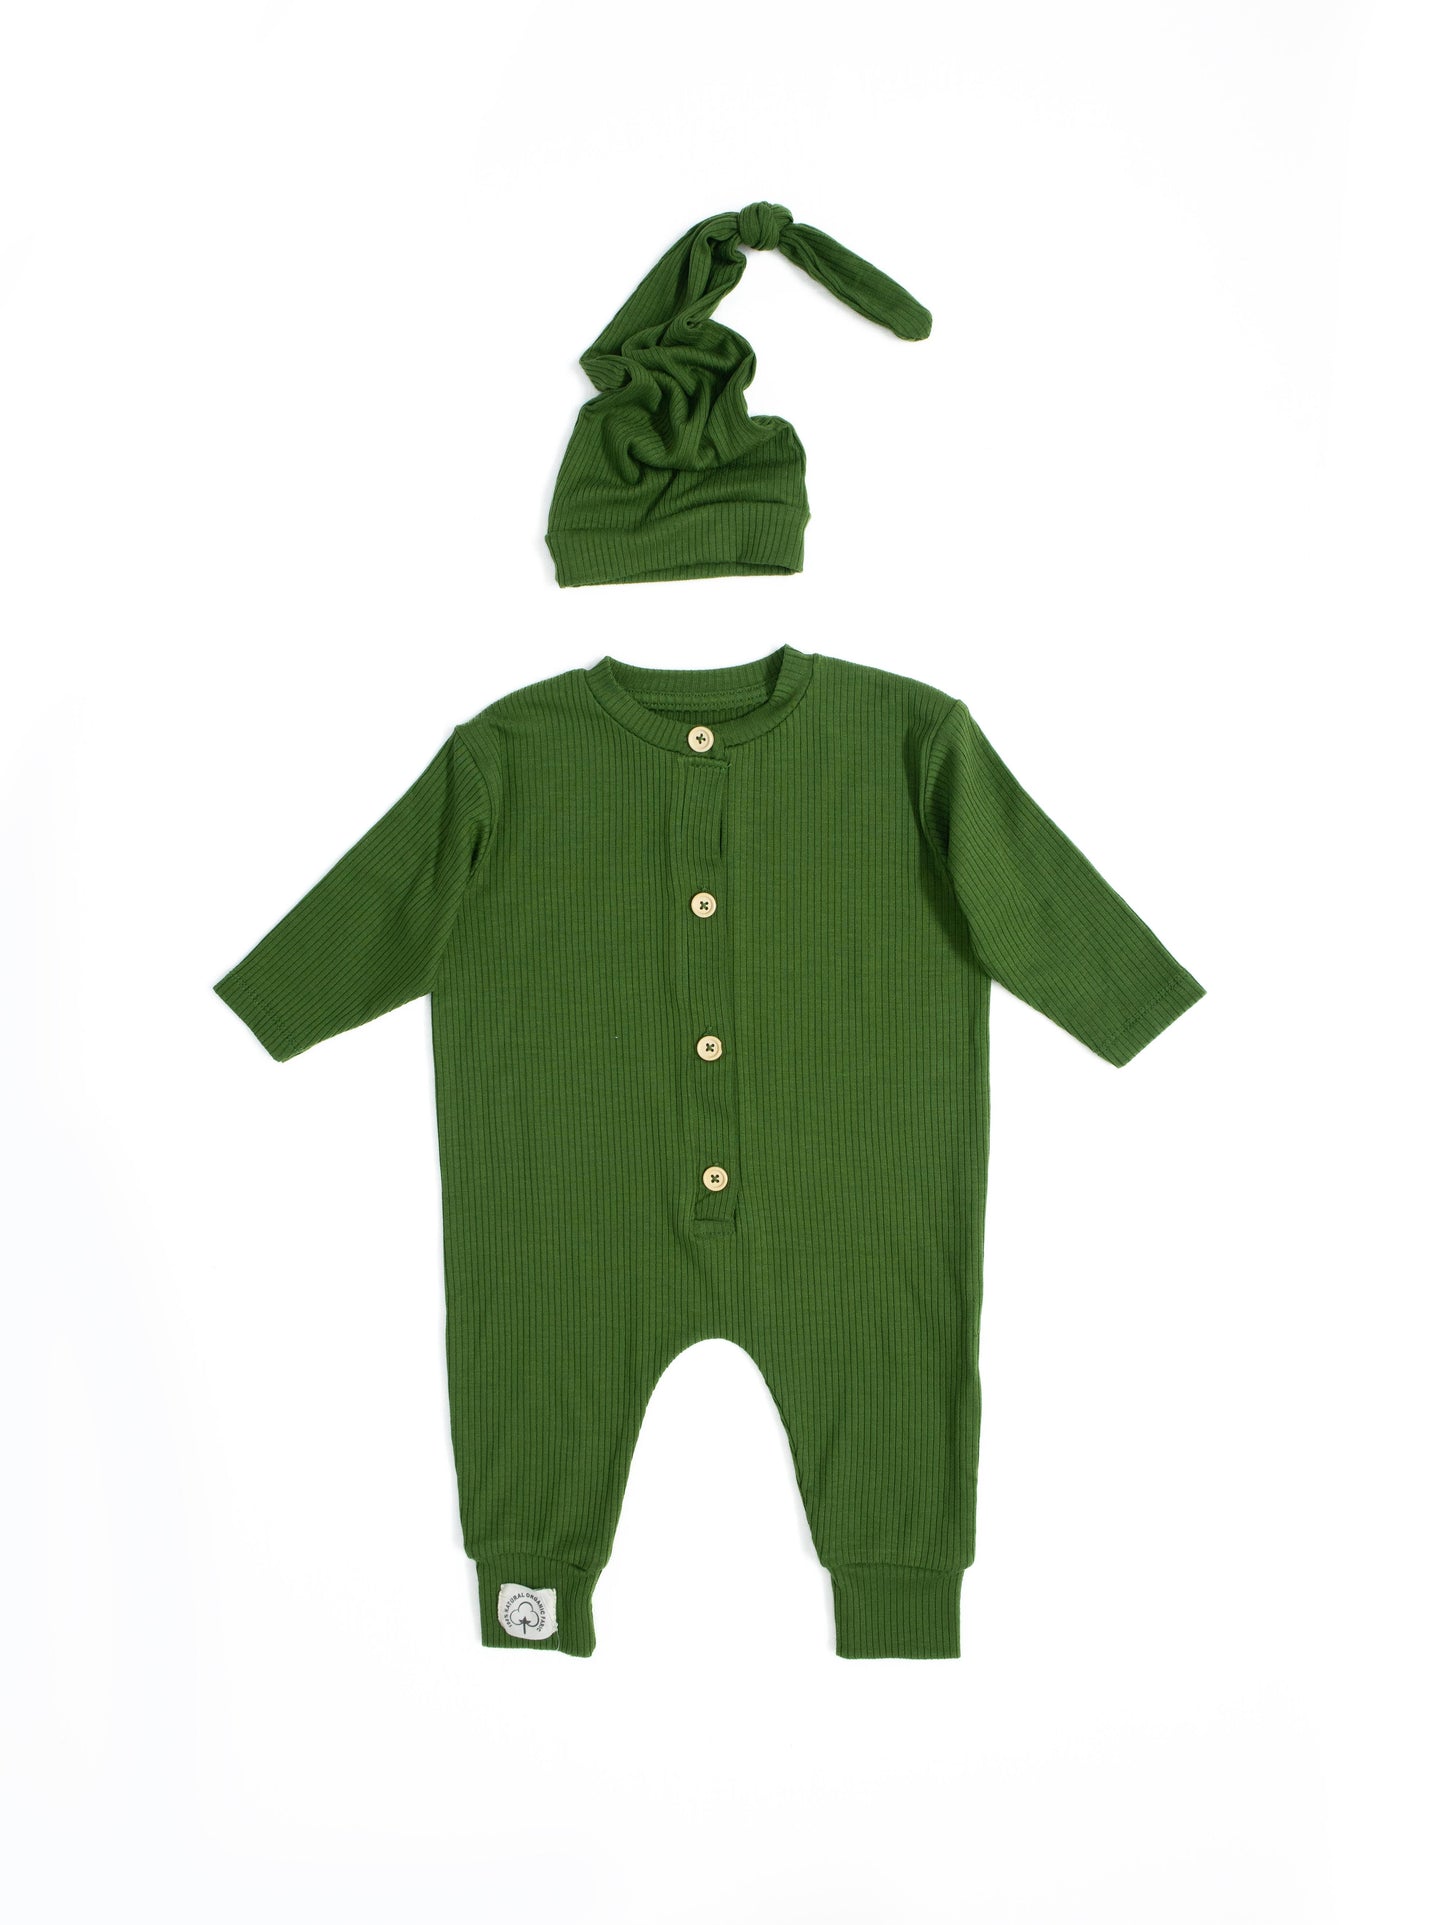 Unisex Baby 100% Lyocell Cotton Overalls and Beanie Set